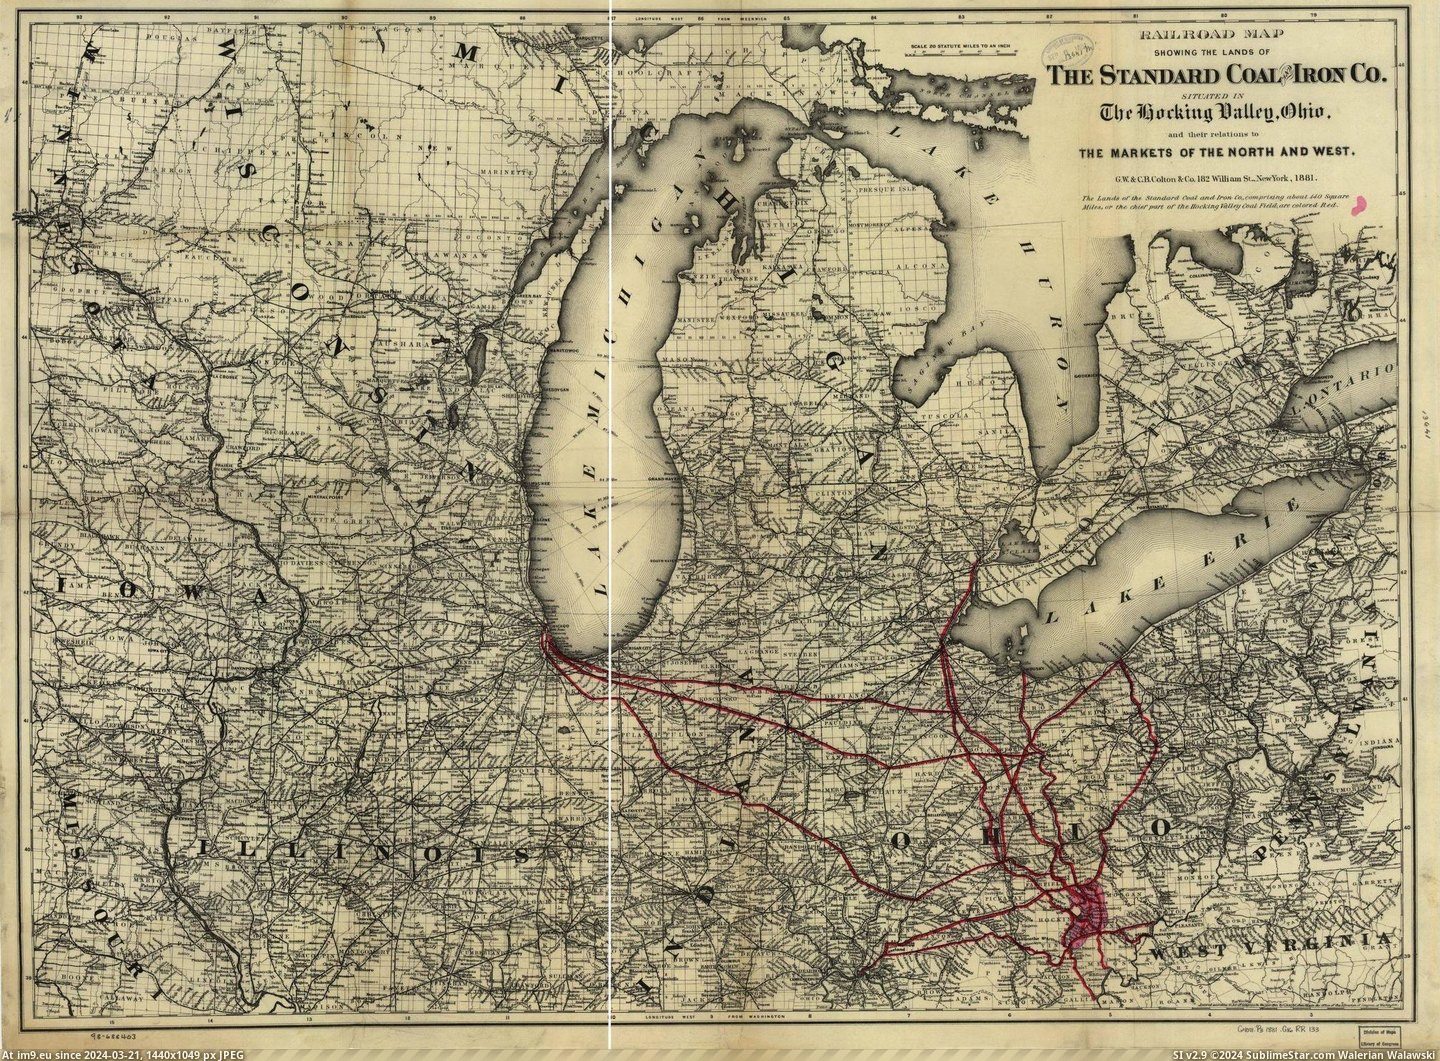 #Map #Showing #Valley #Iron #Coal #Hocking #Relat #Situated #Railroad #Ohio #Standard #Lands [Mapporn] Railroad map showing the lands of the Standard Coal and Iron Co. situated in the Hocking Valley, Ohio, and their relat Pic. (Image of album My r/MAPS favs))